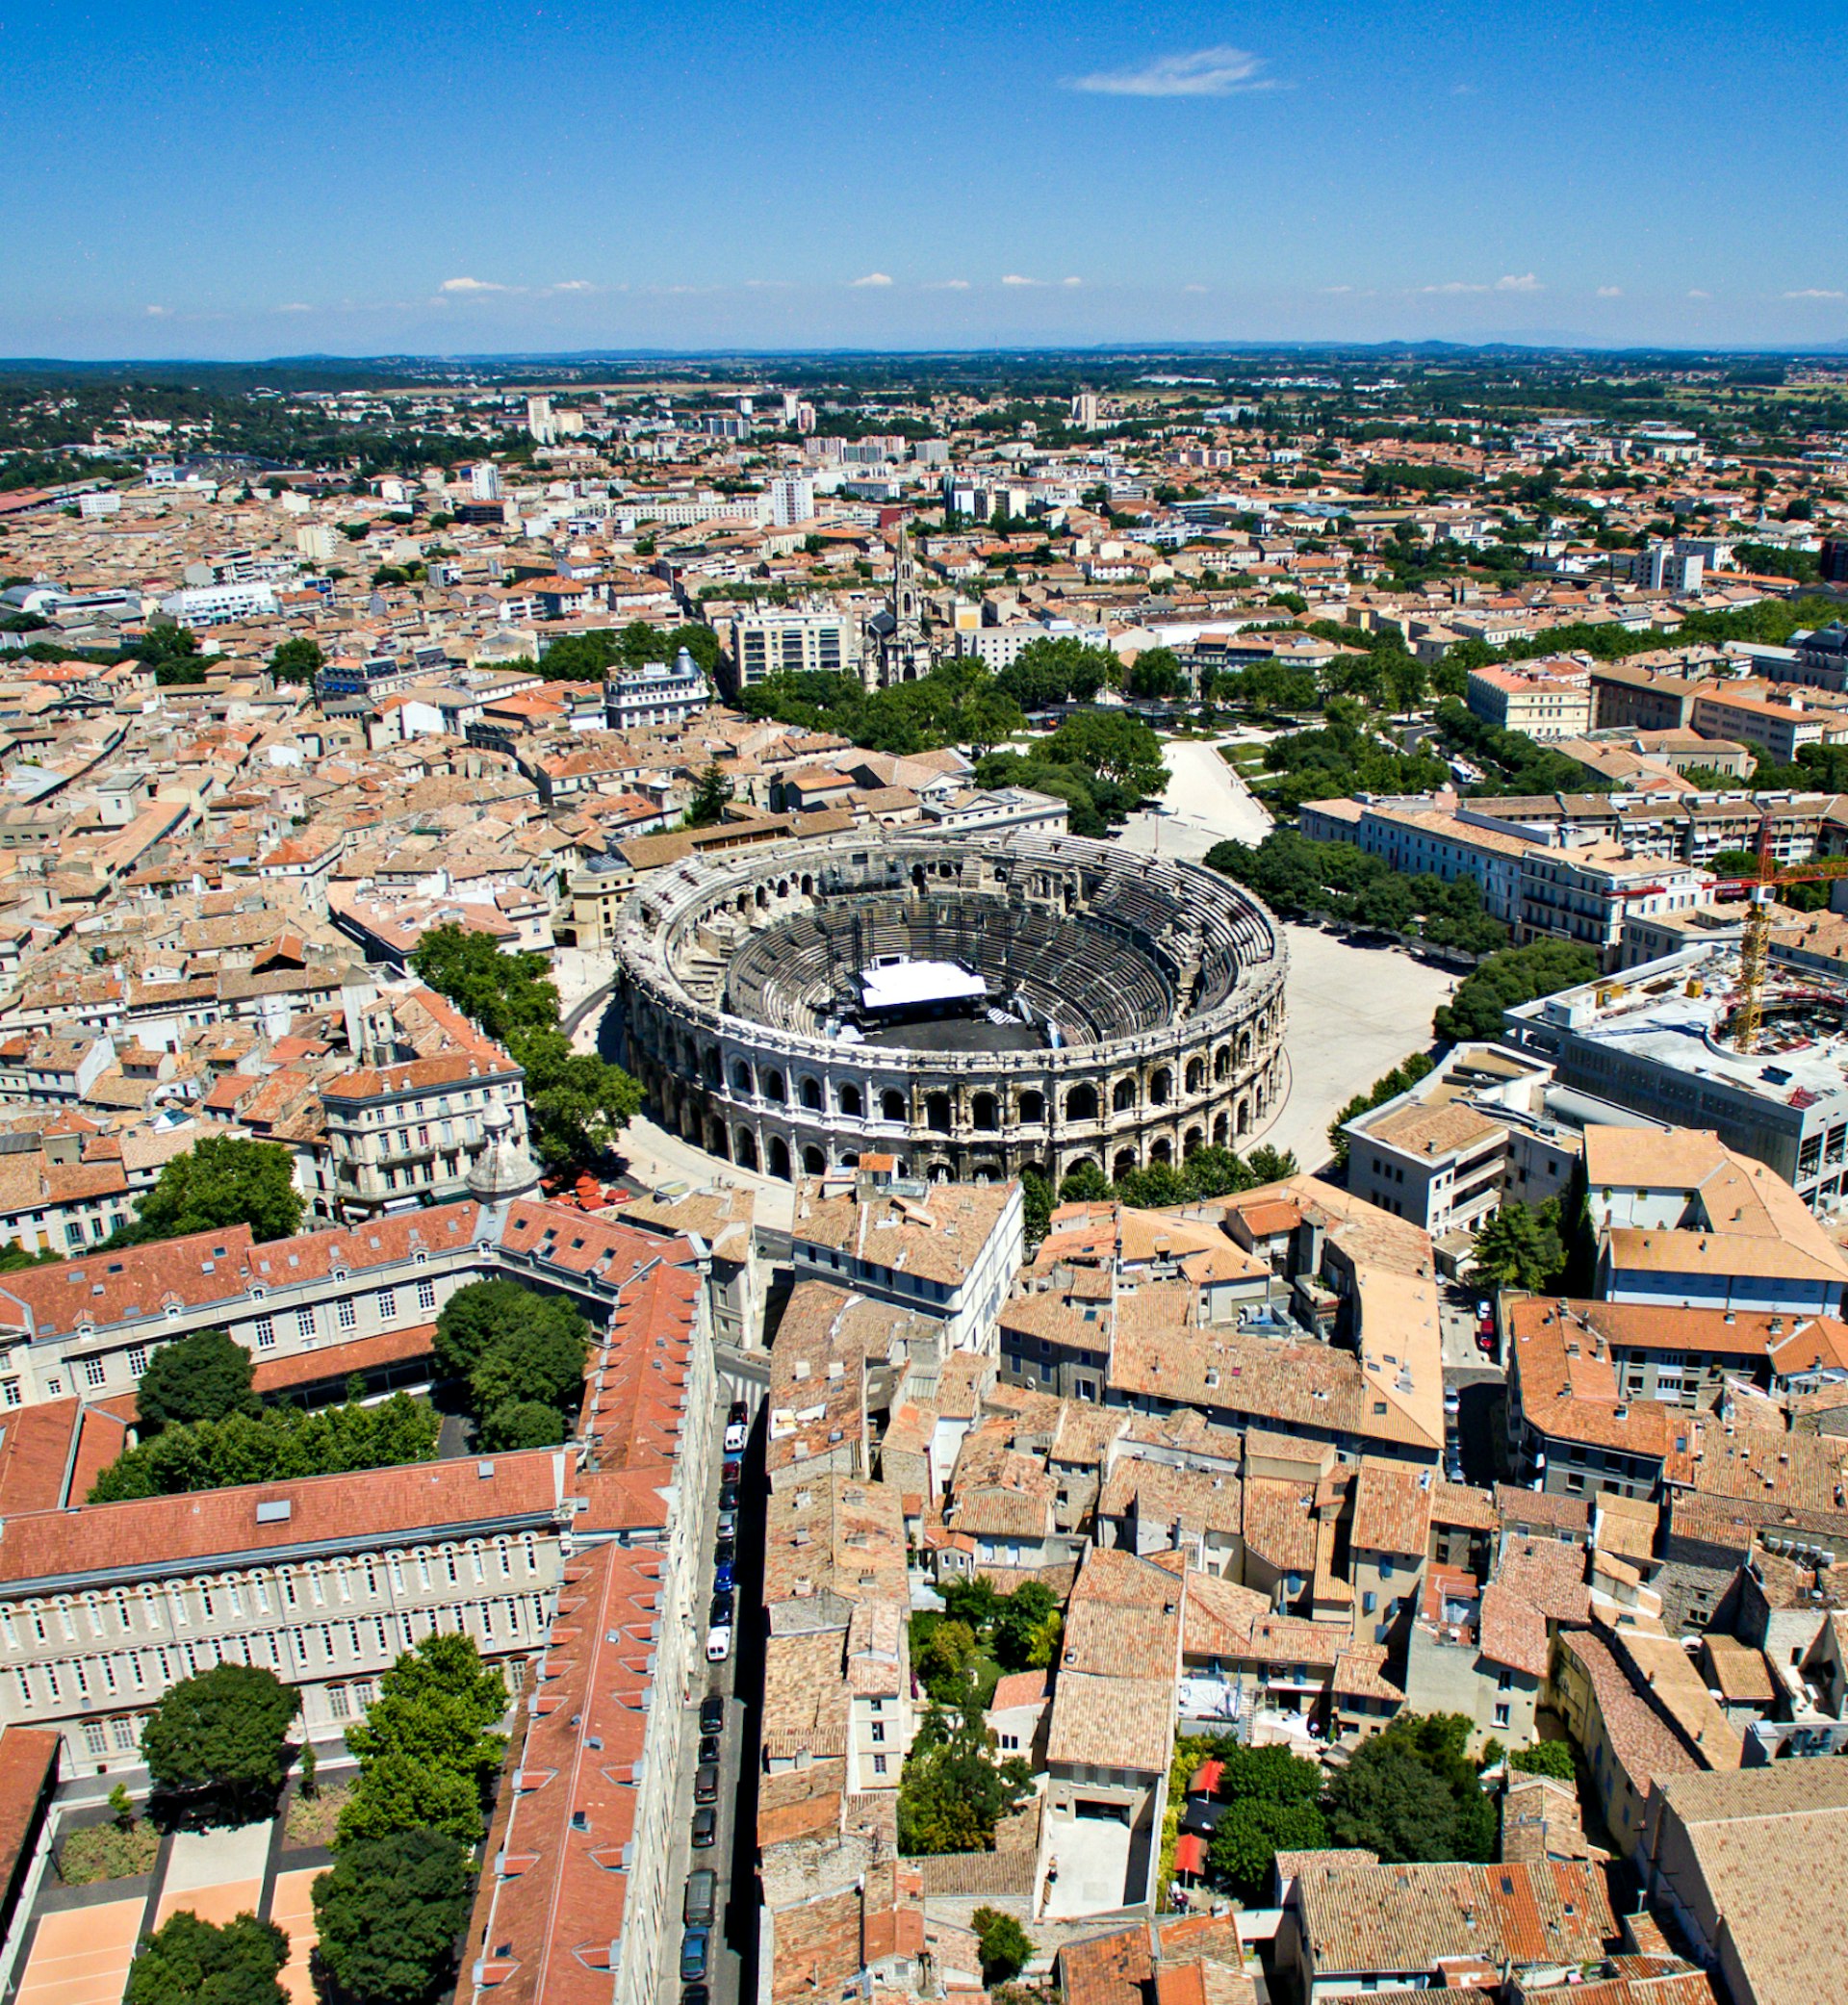 The Les Arènes amphitheatre in Nîmes as seen from the air 